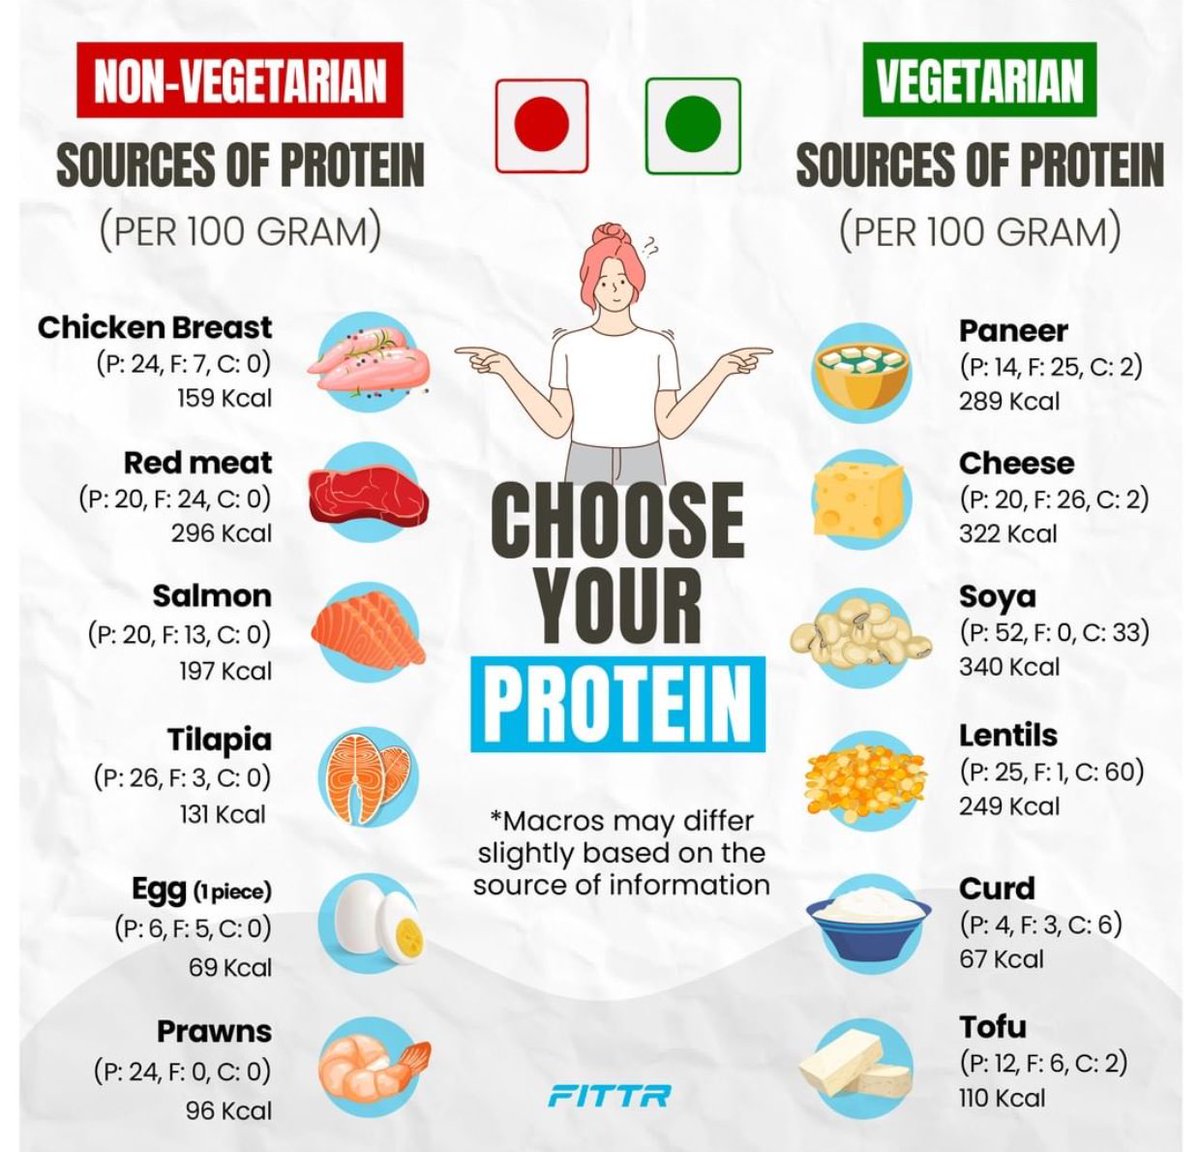 RT @FitBharat: Choose your protein as per your dietary habits 
#EatHealthy #HealthyLiving https://t.co/jMI2hWhrFA